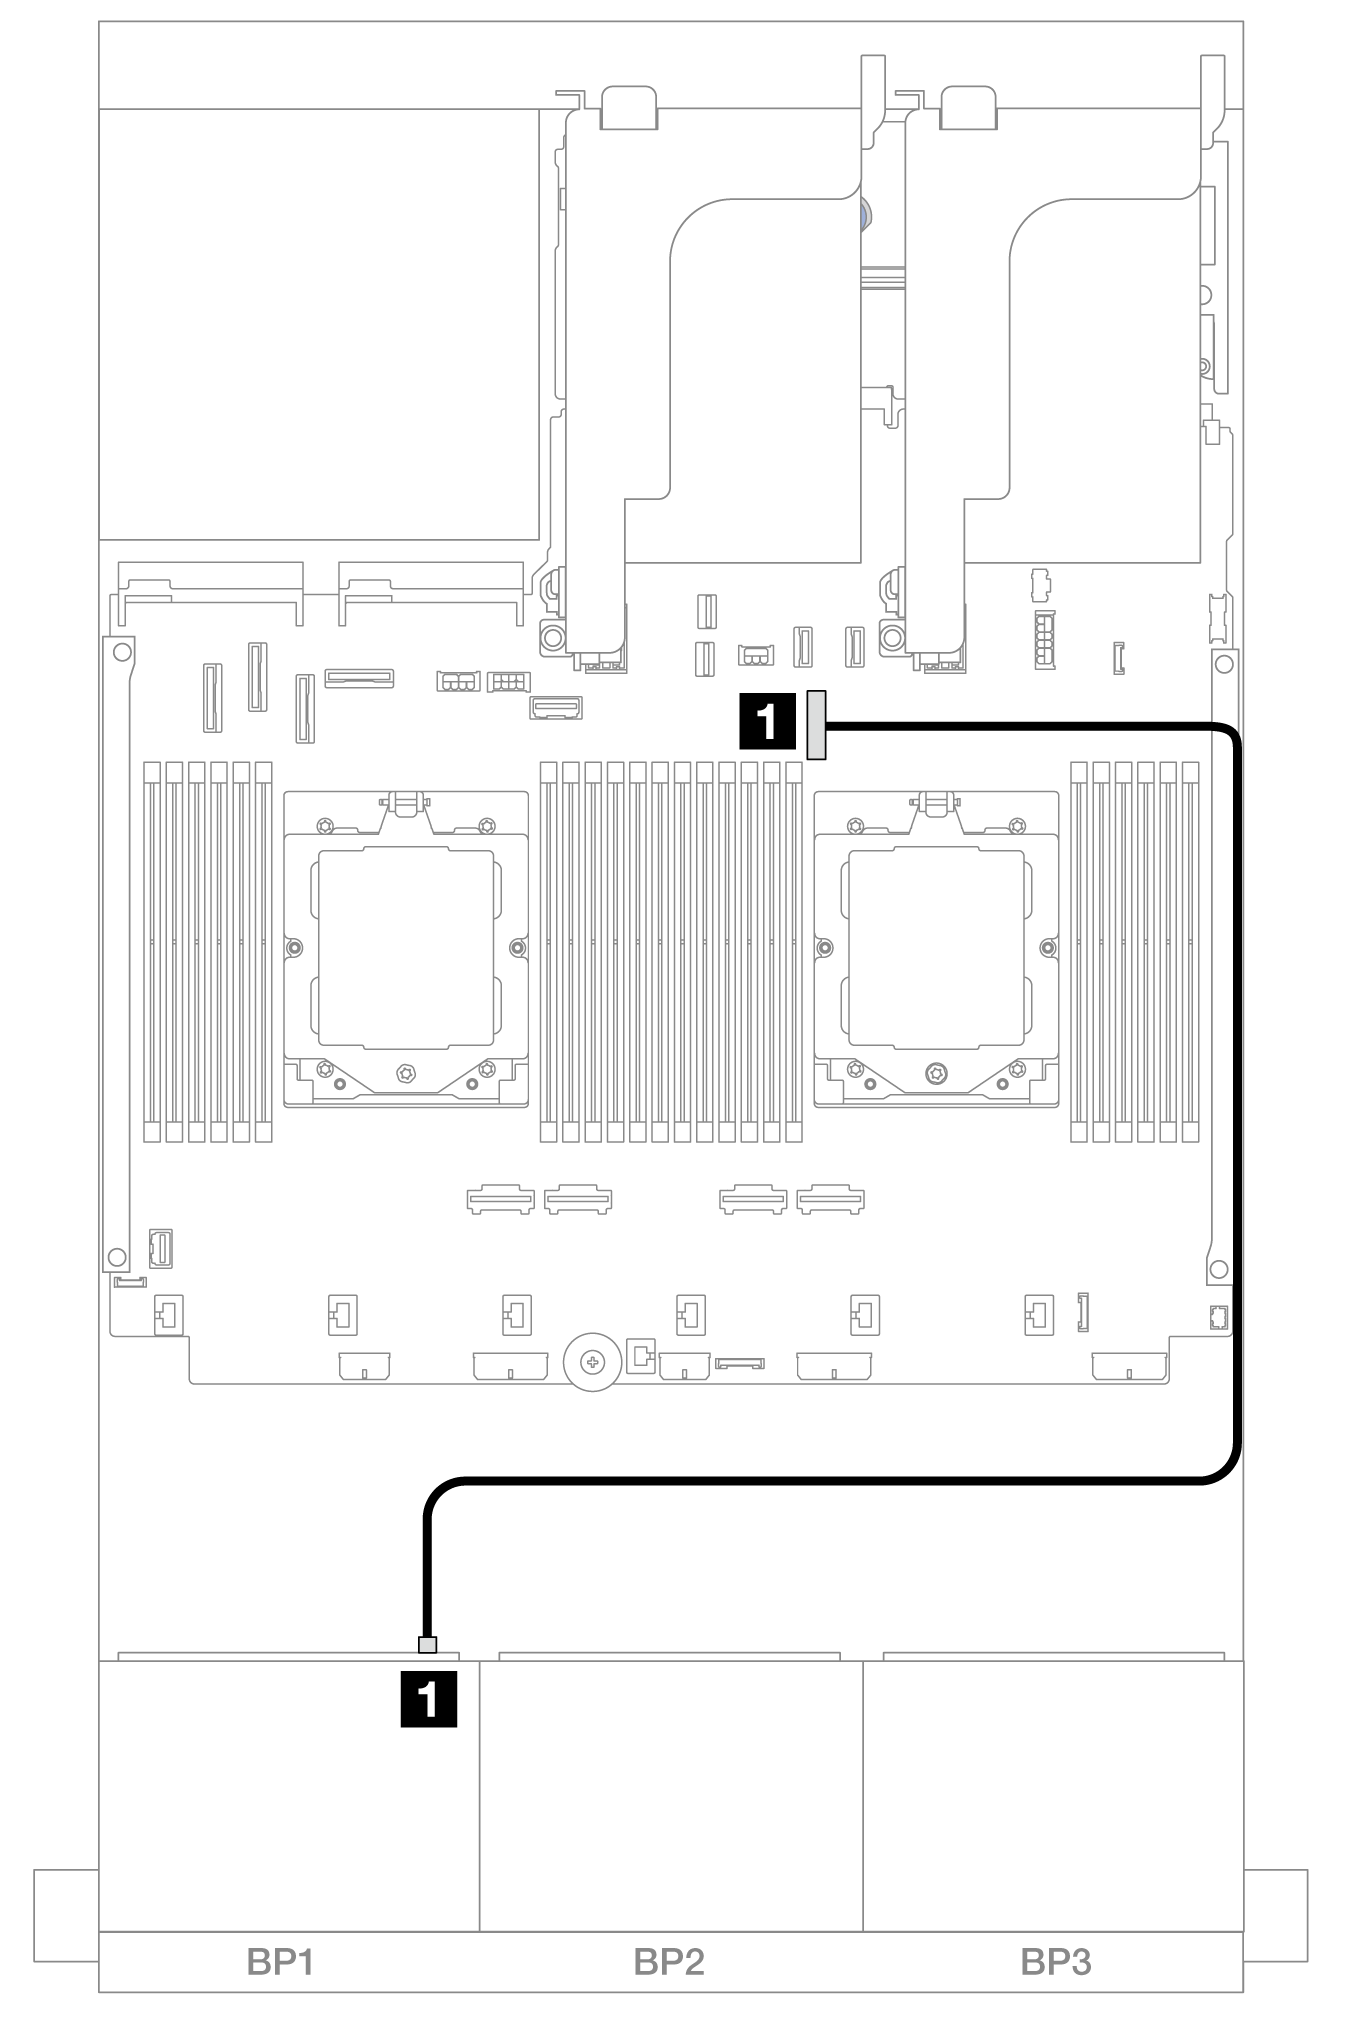 Cable routing when one processor installed